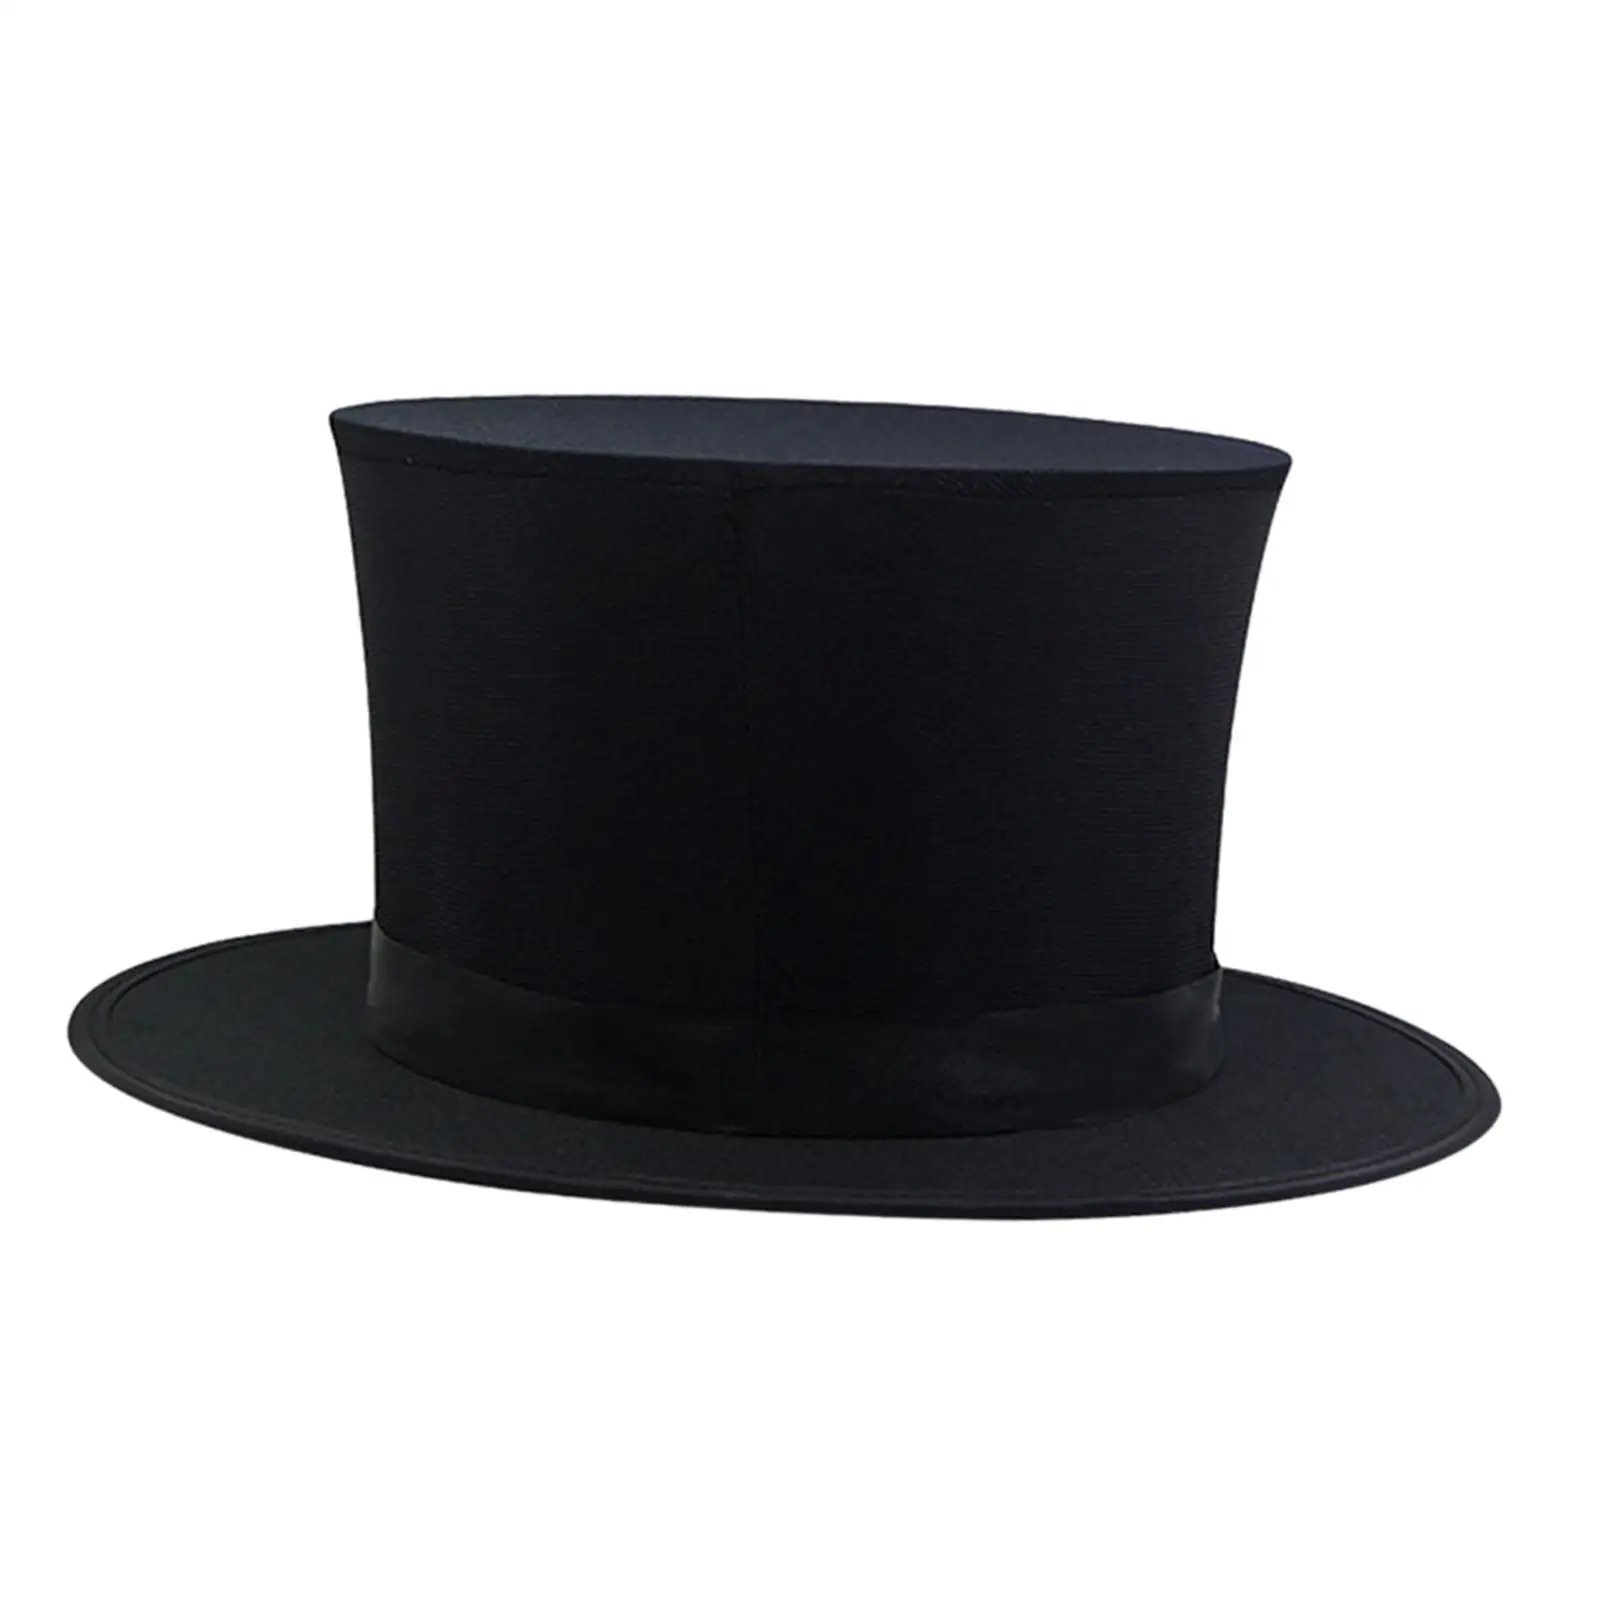 spring hat Props Creative Essential Supplies fun props Object Game Illusions Magician Top Hat magical Tricks for Kids Party